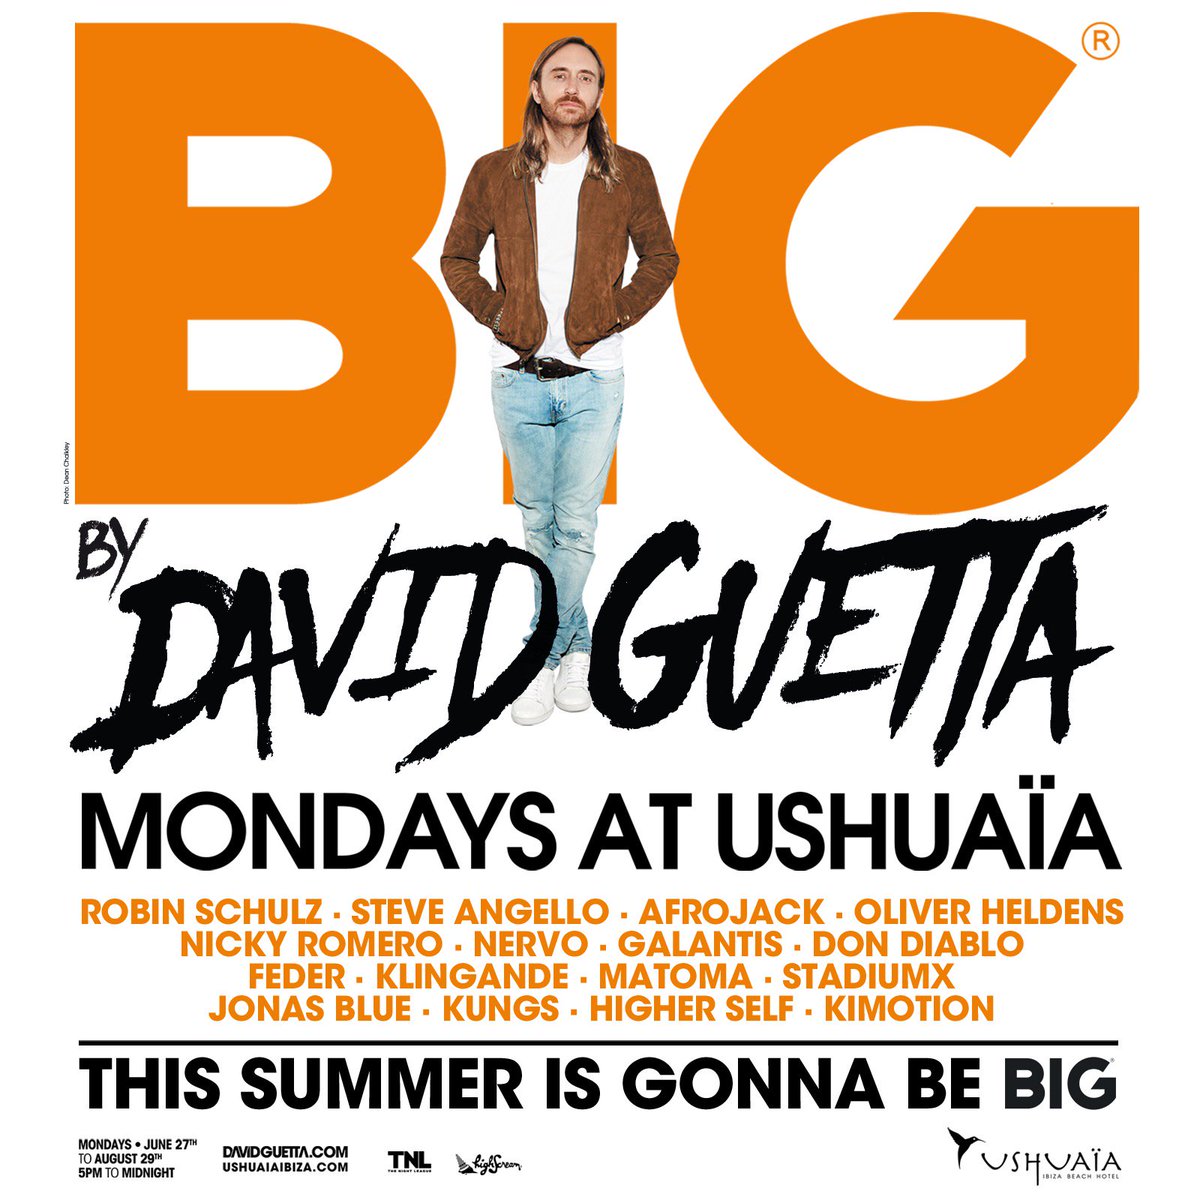 RT @ushuaiaibiza: Mondays are going to be @BIGtheparty! Join @davidguetta this summer at @ushuaiaibiza #BIGtheparty https://t.co/NZ7WpCHxhx